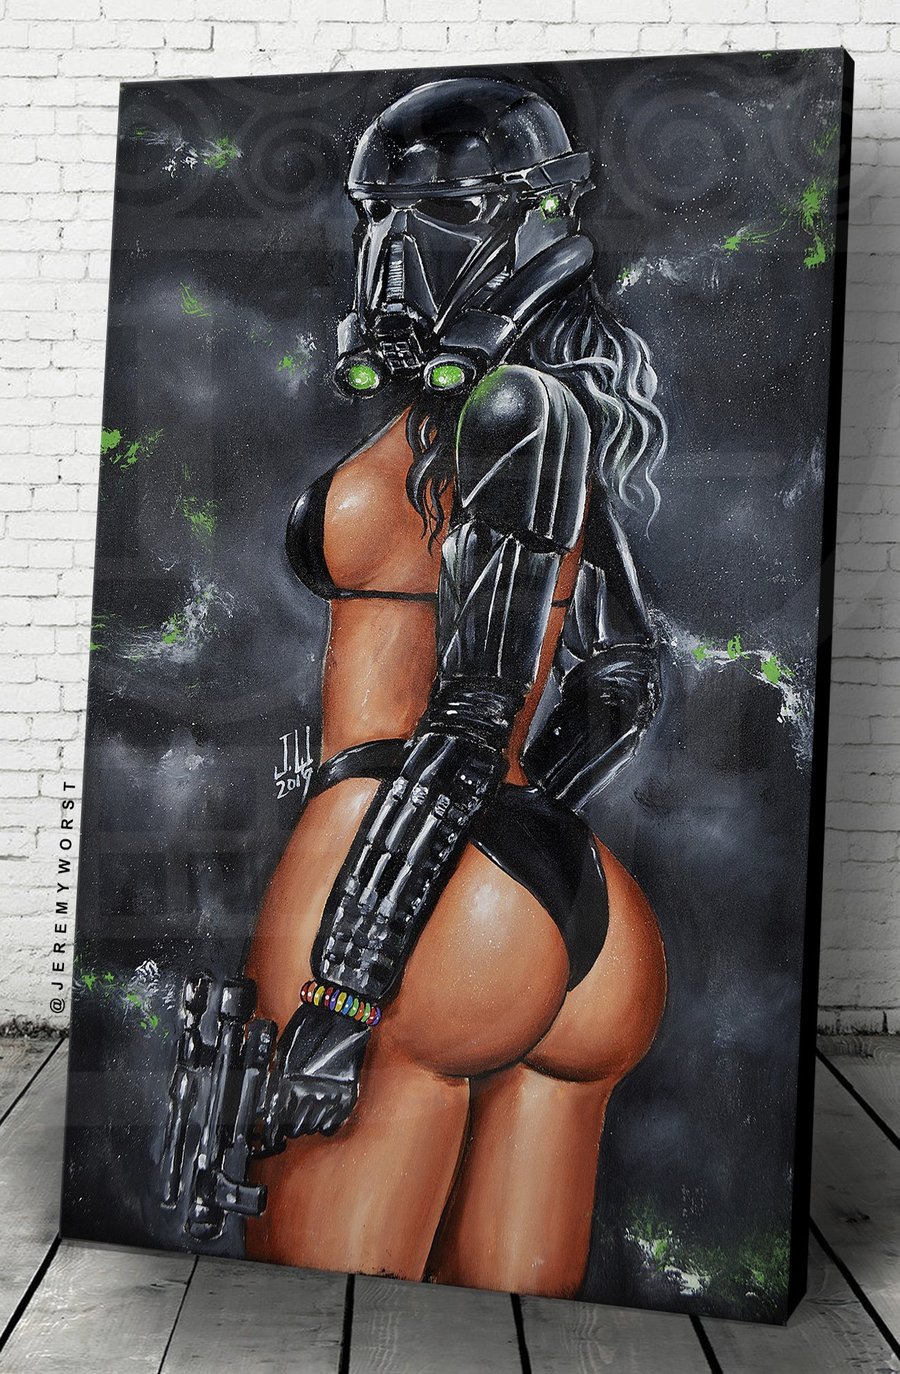 Image of JEREMY WORST  "Death Trooper"  Sexy Star Wars Poster Wall Art Canvas Storm Trooper Shadow